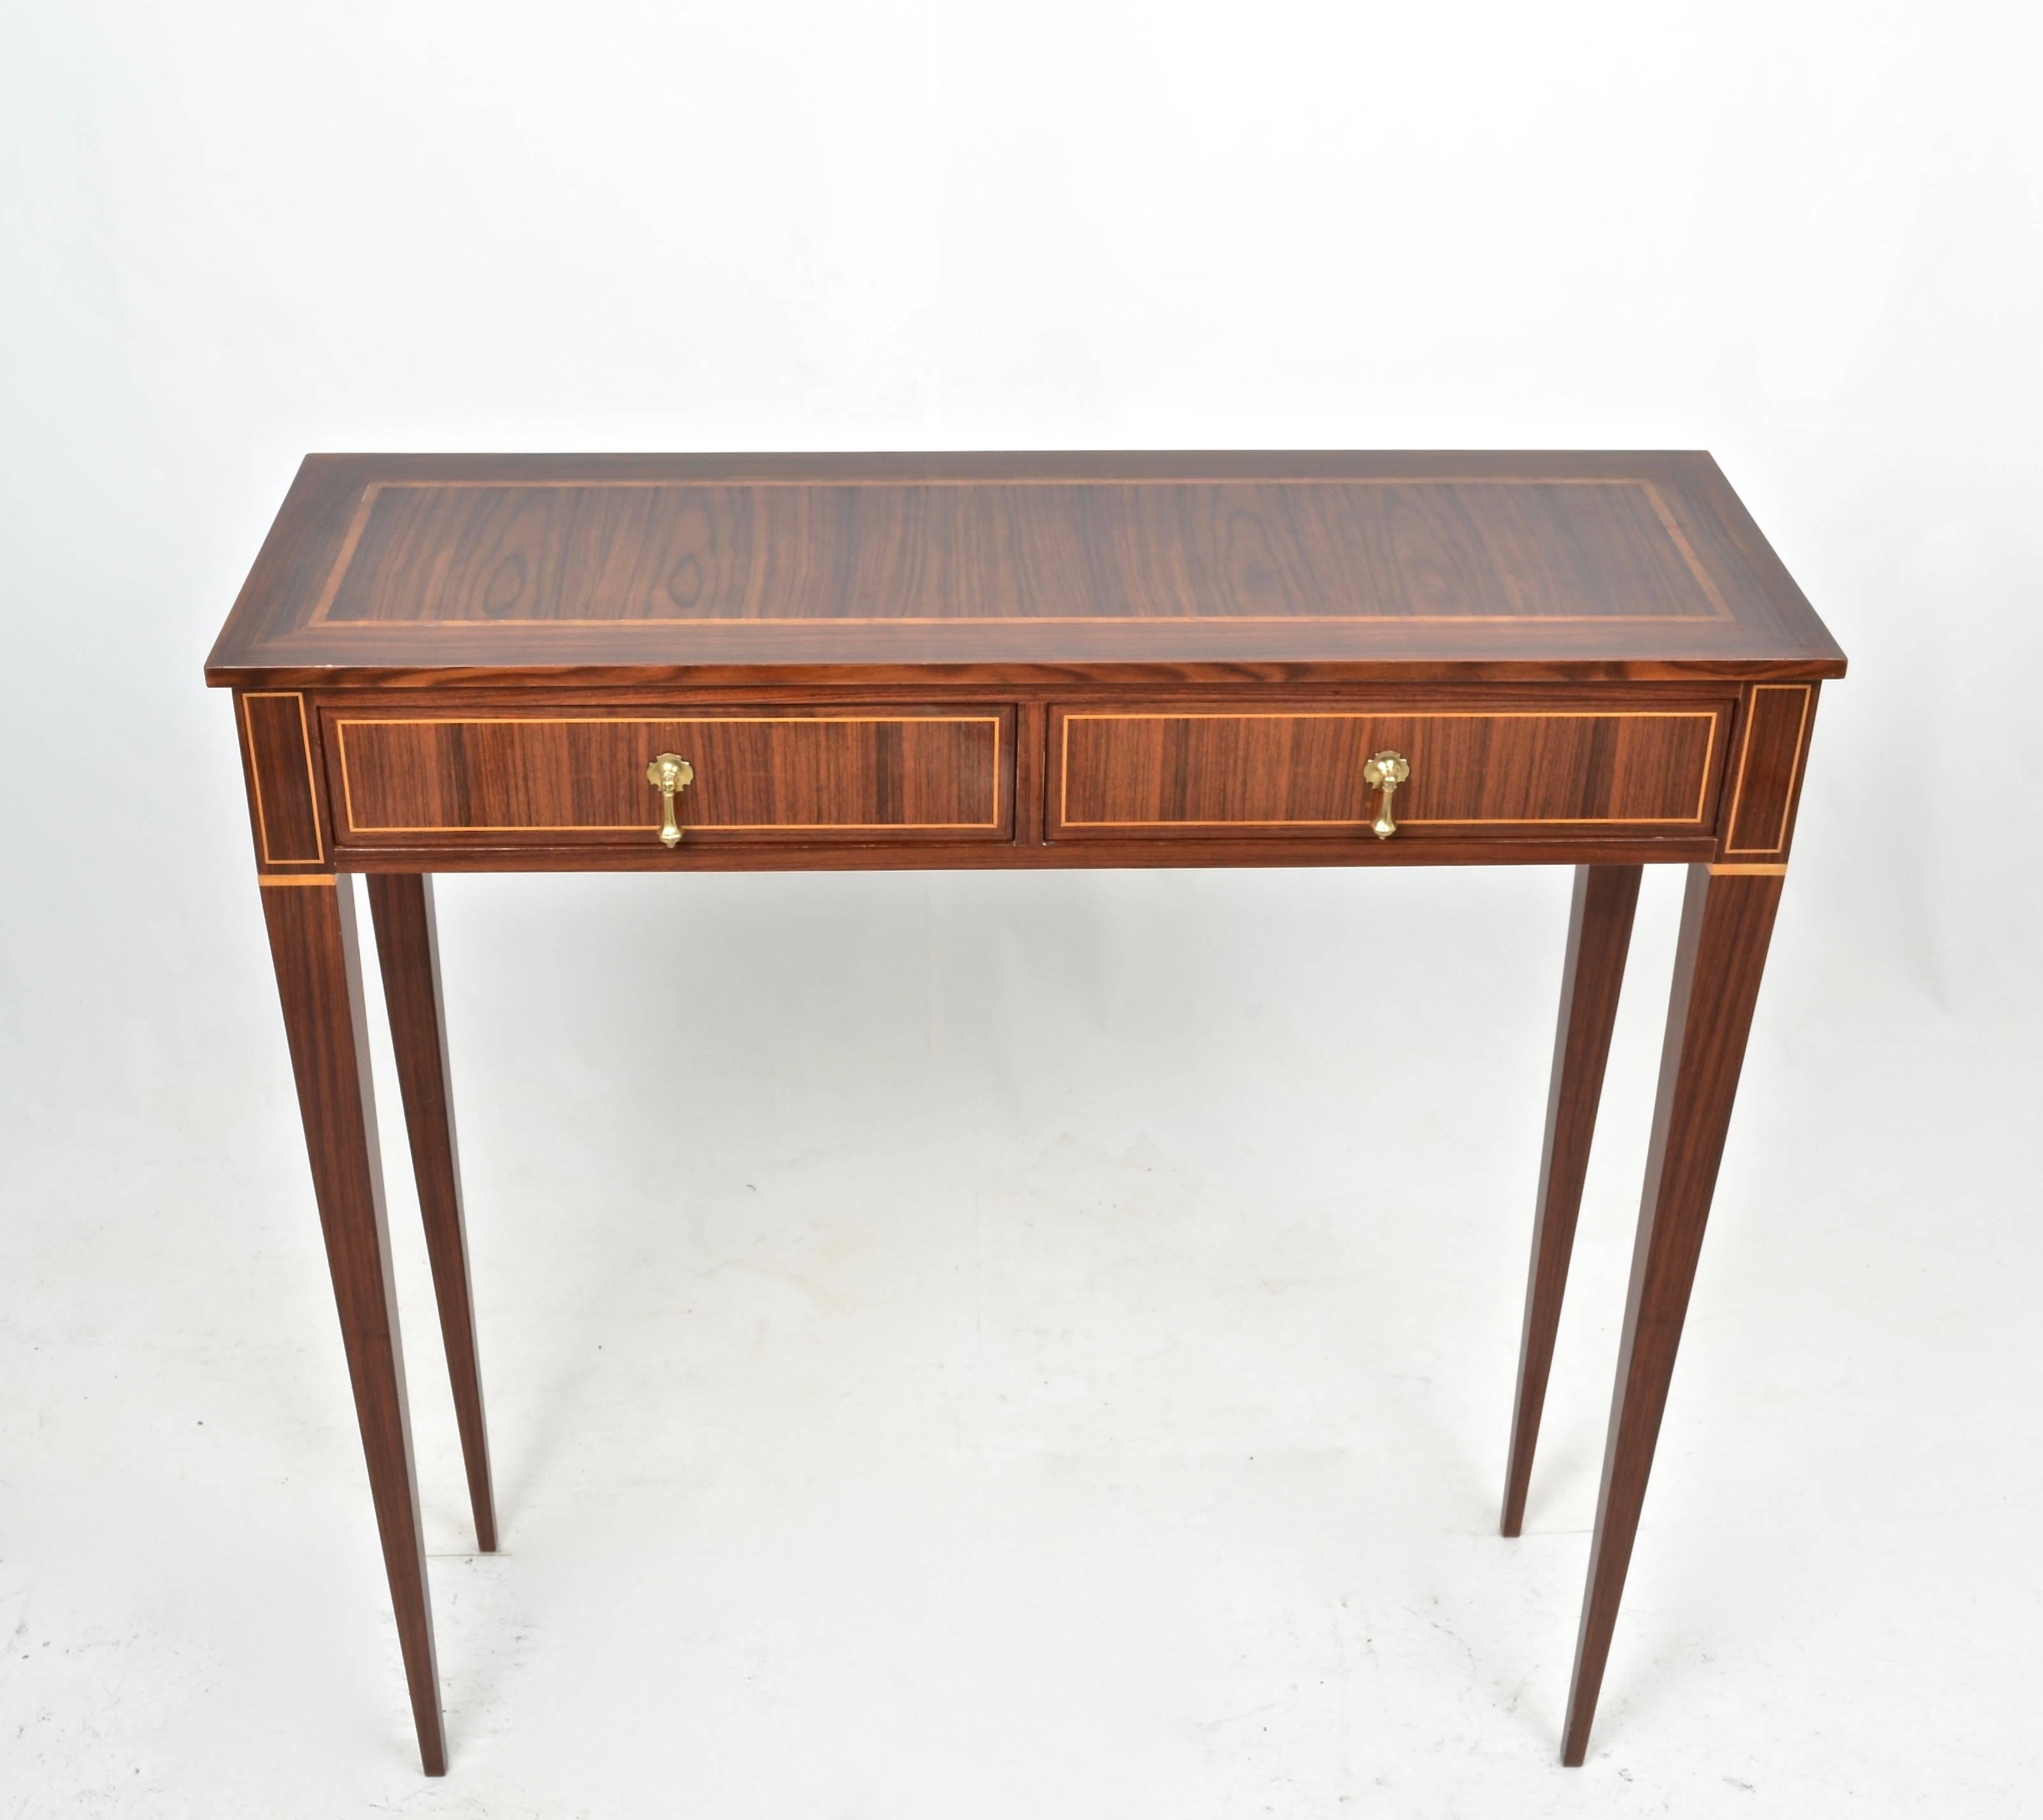 Beautifully formed petite console table featuring exotic woods and simple inlays. Fine tapered legs; two drawers. Quality construction. In the style of Famed Italian designer Paolo Buffa.